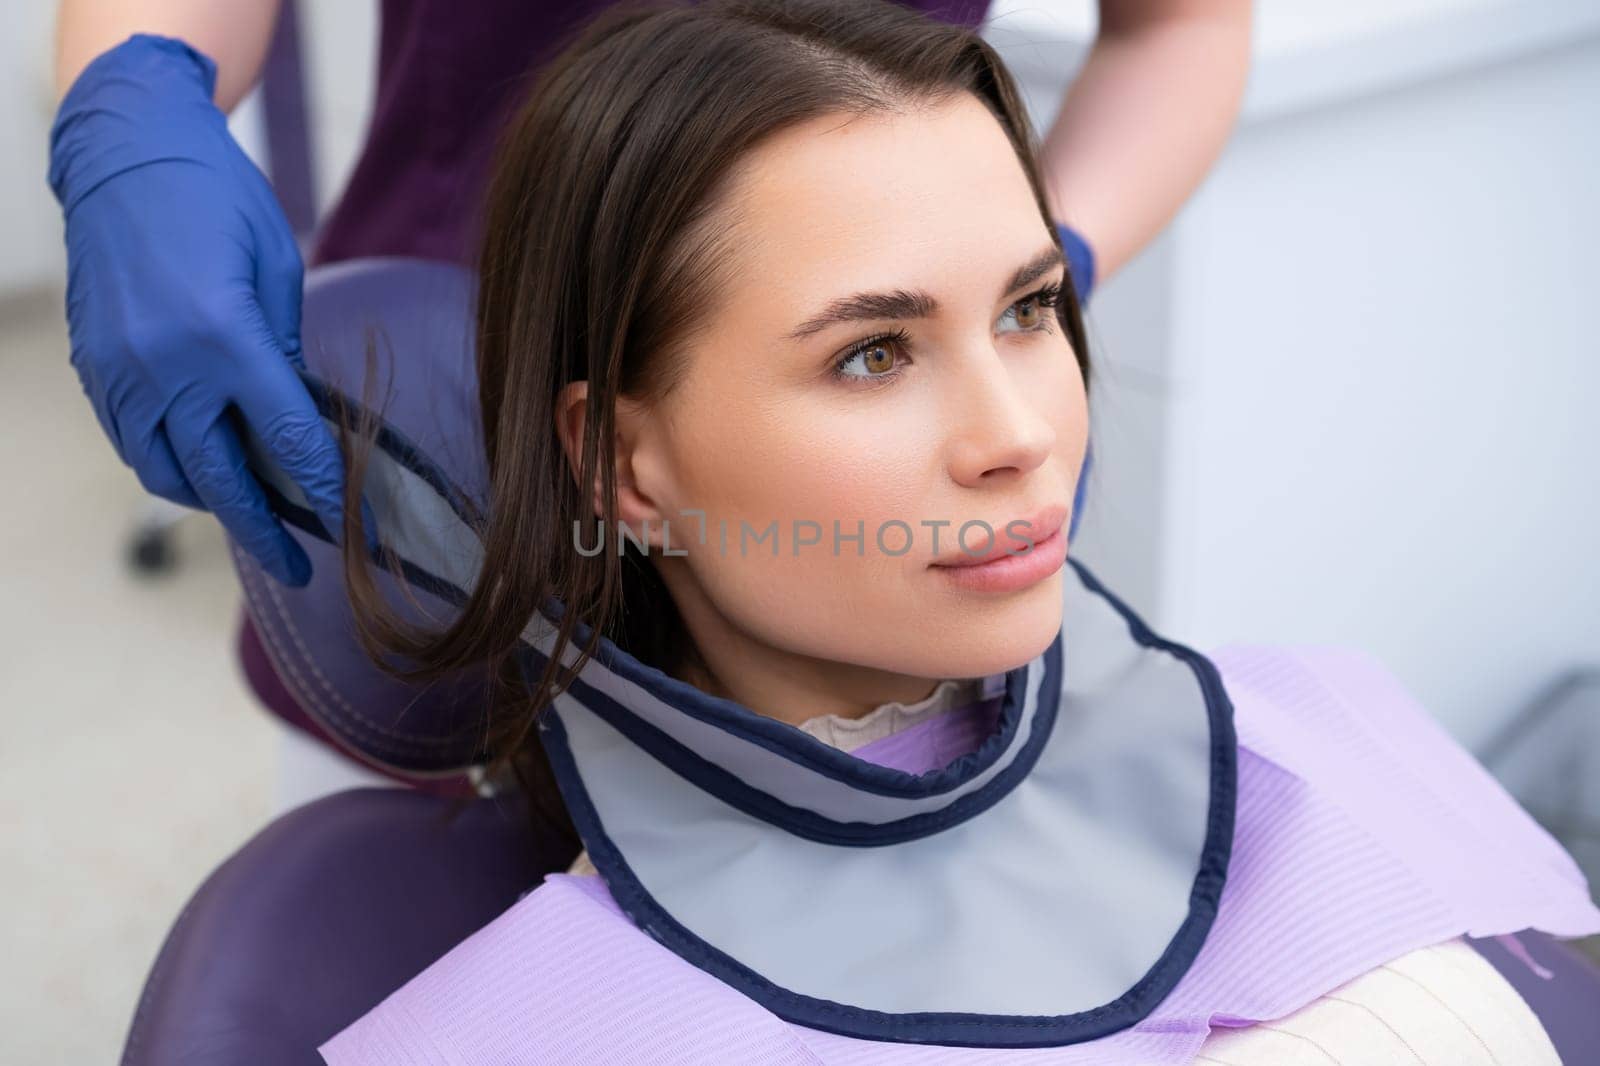 Dentist outfits patient with a protective neck shield before commencing the tooth X-ray procedure. by vladimka